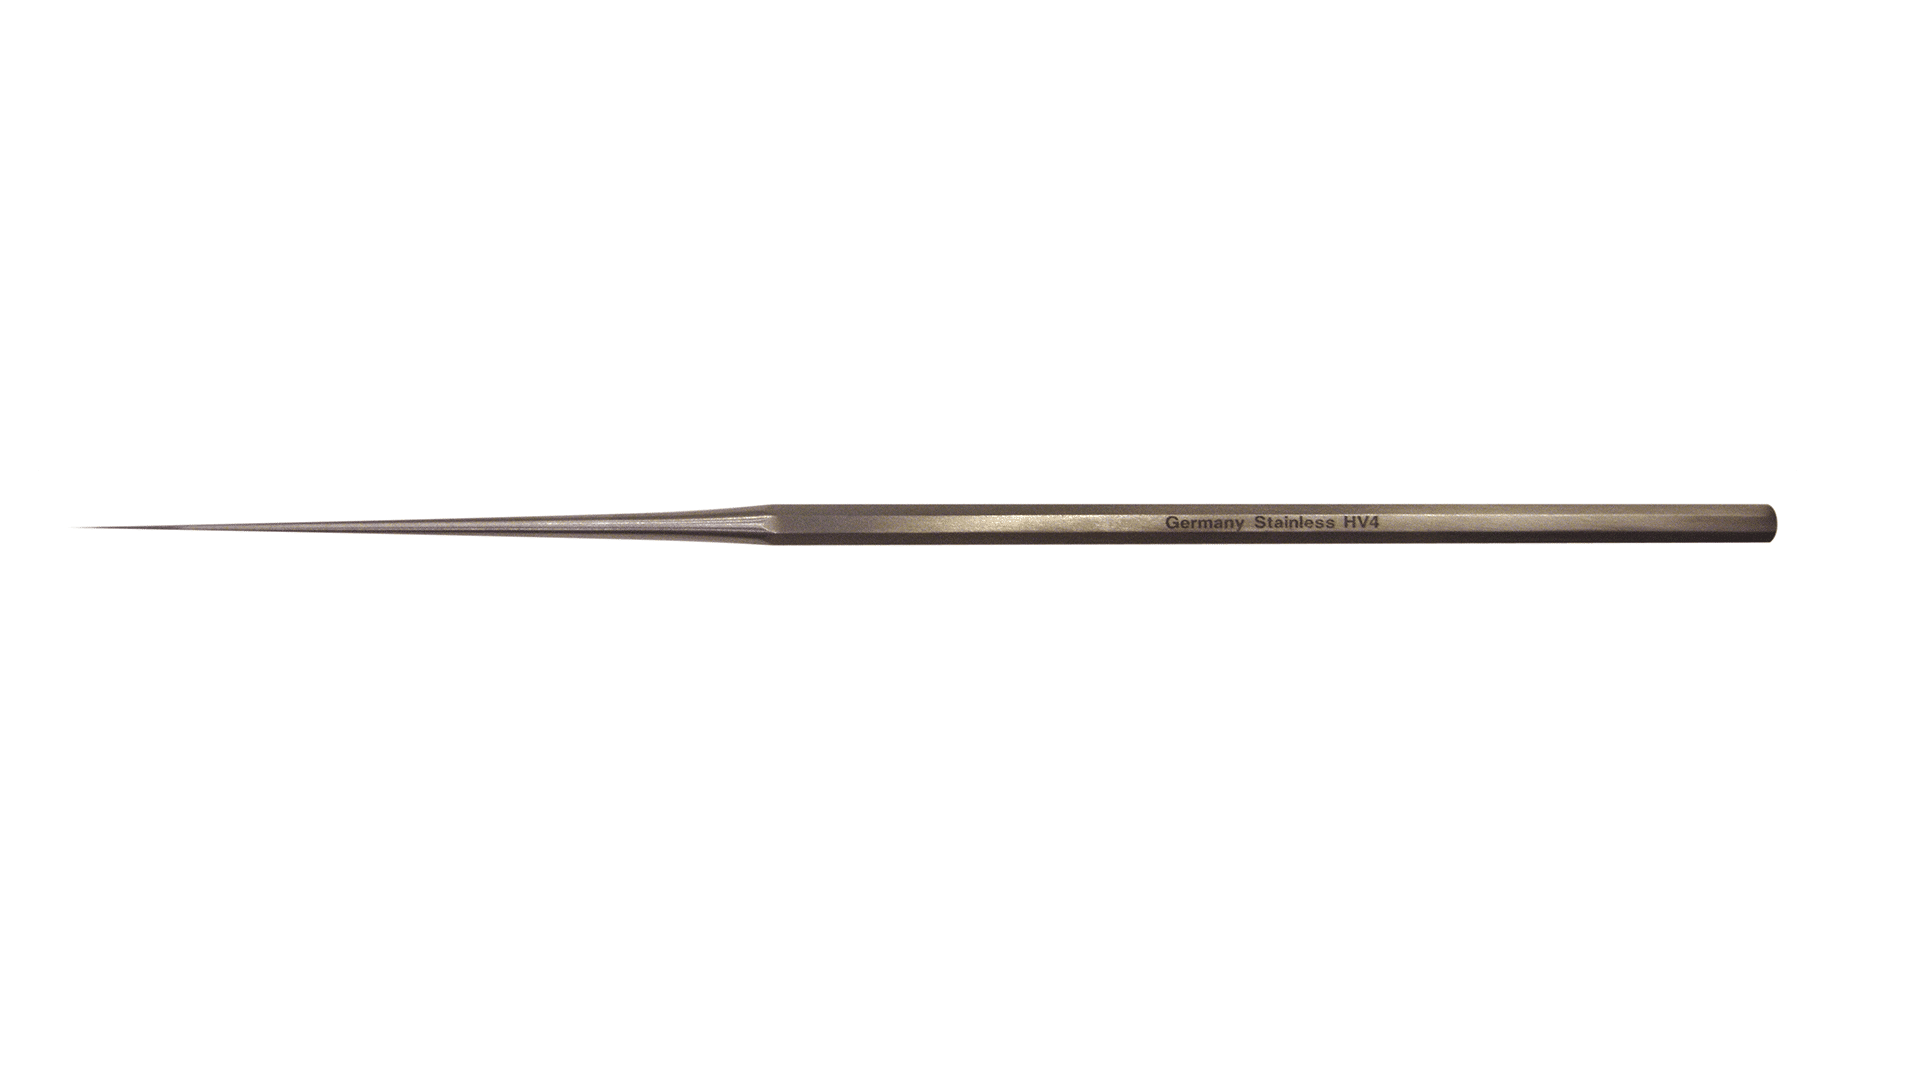 BARBARA NEEDLES, STRAIGHT, LENGTH 6" STRAIGHT, POINTED ANGLED, BLUNT SLIGHT CURVED, POINTED STRONG CURVED, POINTED .3MM ROUND 90 DEGREE ANGLED, STRAIGHT SHAFT, POINTED .6MM ROUND 90 DEGREE 1MM ROUND 90 DEGREE .3MM ROUND 45 DEGREE .6MM ROUND 45 GERMAN STAINLESS STEEL O.R. GRADE STAINLESS STEEL